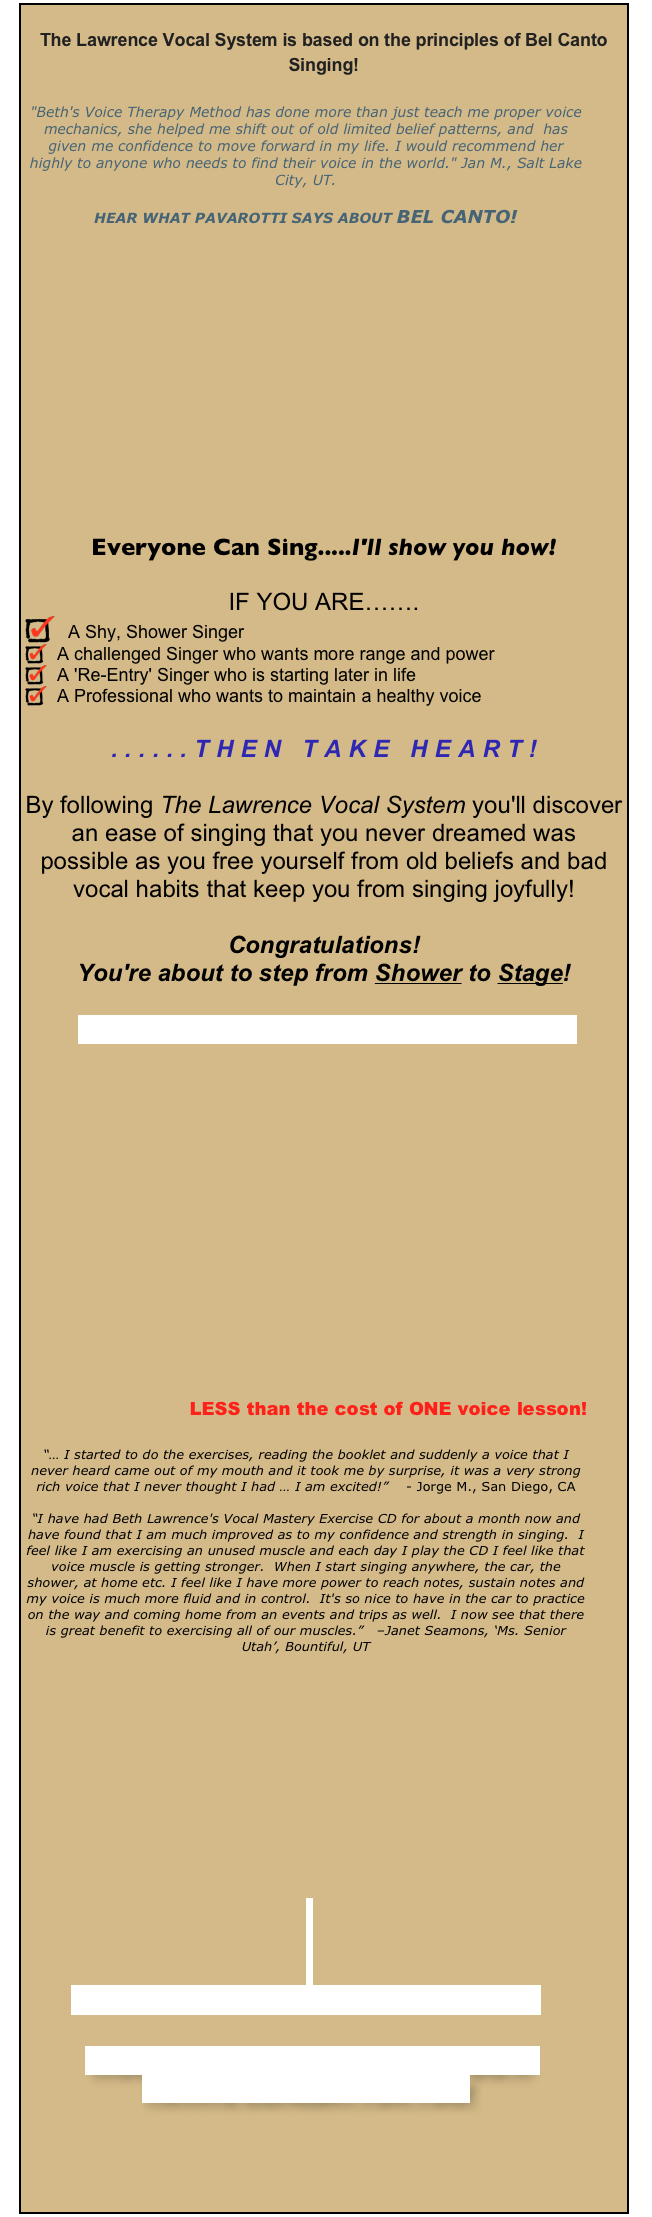 
The Lawrence Vocal System is based on the principles of Bel Canto Singing!

"Beth's Voice Therapy Method has done more than just teach me proper voice mechanics, she helped me shift out of old limited belief patterns, and  has given me confidence to move forward in my life. I would recommend her highly to anyone who needs to find their voice in the world." Jan M., Salt Lake City, UT.

HEAR WHAT PAVAROTTI SAYS ABOUT BEL CANTO!














Everyone Can Sing.....I'll show you how!

IF YOU ARE…….
  A Shy, Shower Singer
  A challenged Singer who wants more range and power
  A 'Re-Entry' Singer who is starting later in life
  A Professional who wants to maintain a healthy voice

......THEN TAKE HEART!

By following The Lawrence Vocal System you'll discover an ease of singing that you never dreamed was possible as you free yourself from old beliefs and bad vocal habits that keep you from singing joyfully!

Congratulations!  
You're about to step from Shower to Stage!

READ MORE & ORDER YOUR BOOK NOW!









  





LESS than the cost of ONE voice lesson!

“… I started to do the exercises, reading the booklet and suddenly a voice that I never heard came out of my mouth and it took me by surprise, it was a very strong rich voice that I never thought I had … I am excited!”    - Jorge M., San Diego, CA

“I have had Beth Lawrence's Vocal Mastery Exercise CD for about a month now and have found that I am much improved as to my confidence and strength in singing.  I feel like I am exercising an unused muscle and each day I play the CD I feel like that voice muscle is getting stronger.  When I start singing anywhere, the car, the shower, at home etc. I feel like I have more power to reach notes, sustain notes and my voice is much more fluid and in control.  It's so nice to have in the car to practice on the way and coming home from an events and trips as well.  I now see that there is great benefit to exercising all of our muscles.”   –Janet Seamons, ‘Ms. Senior Utah’, Bountiful, UT













Prefer private coaching with Beth?  


WOULD YOU LIKE TO HAVE BETH DO A 
PRIVATE CONCERT FOR YOU?





